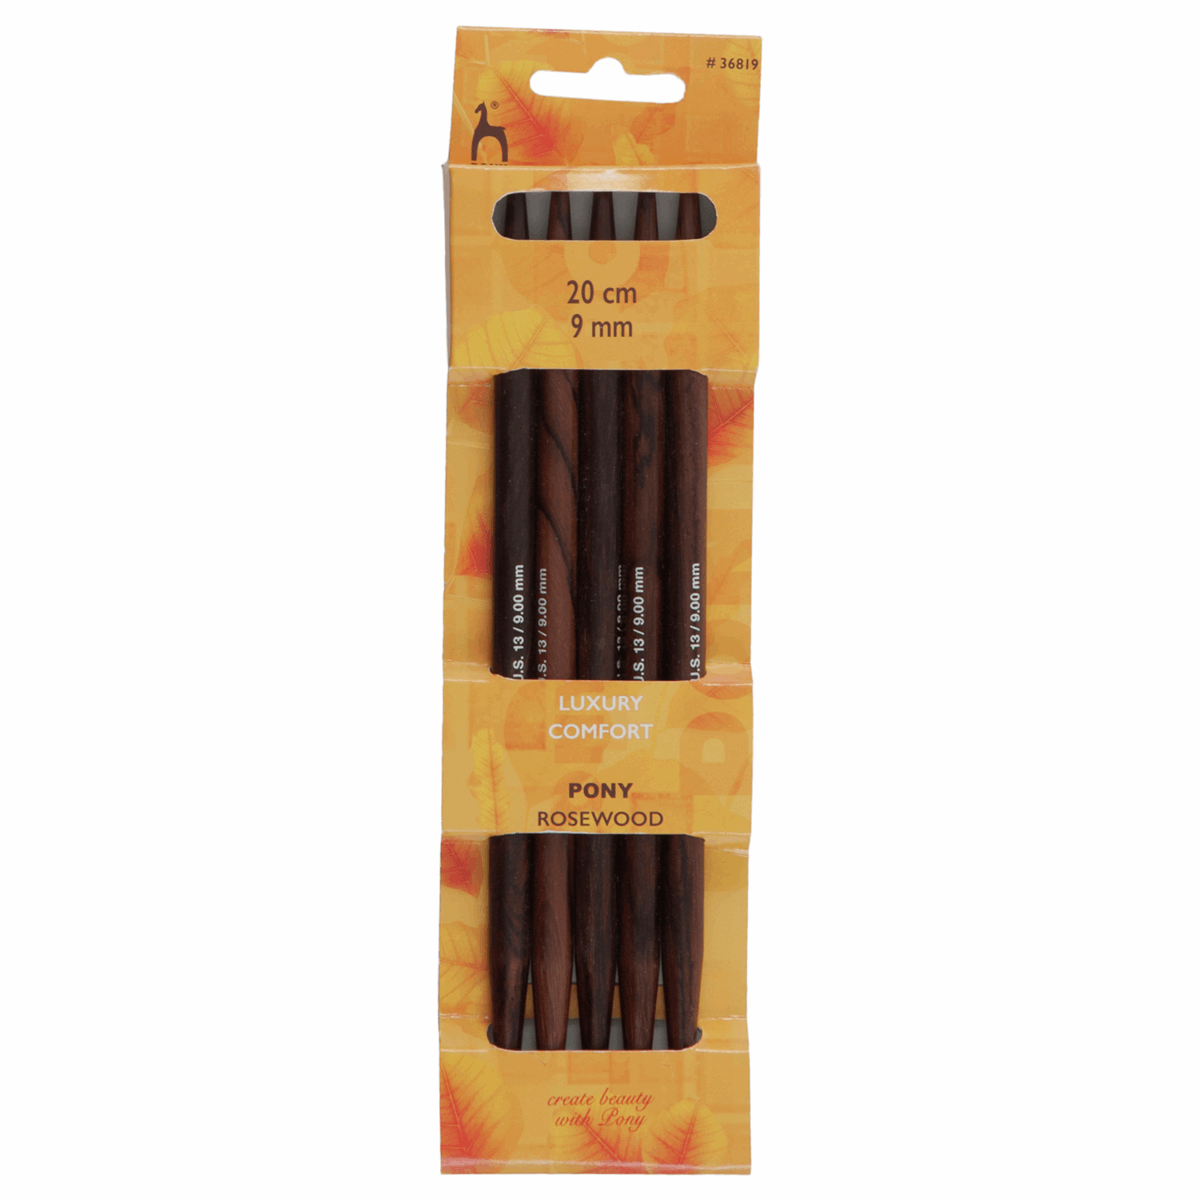 PONY 'Rosewood' Double-Ended Knitting Pins - 20cm x 9.00mm (Set of 5)